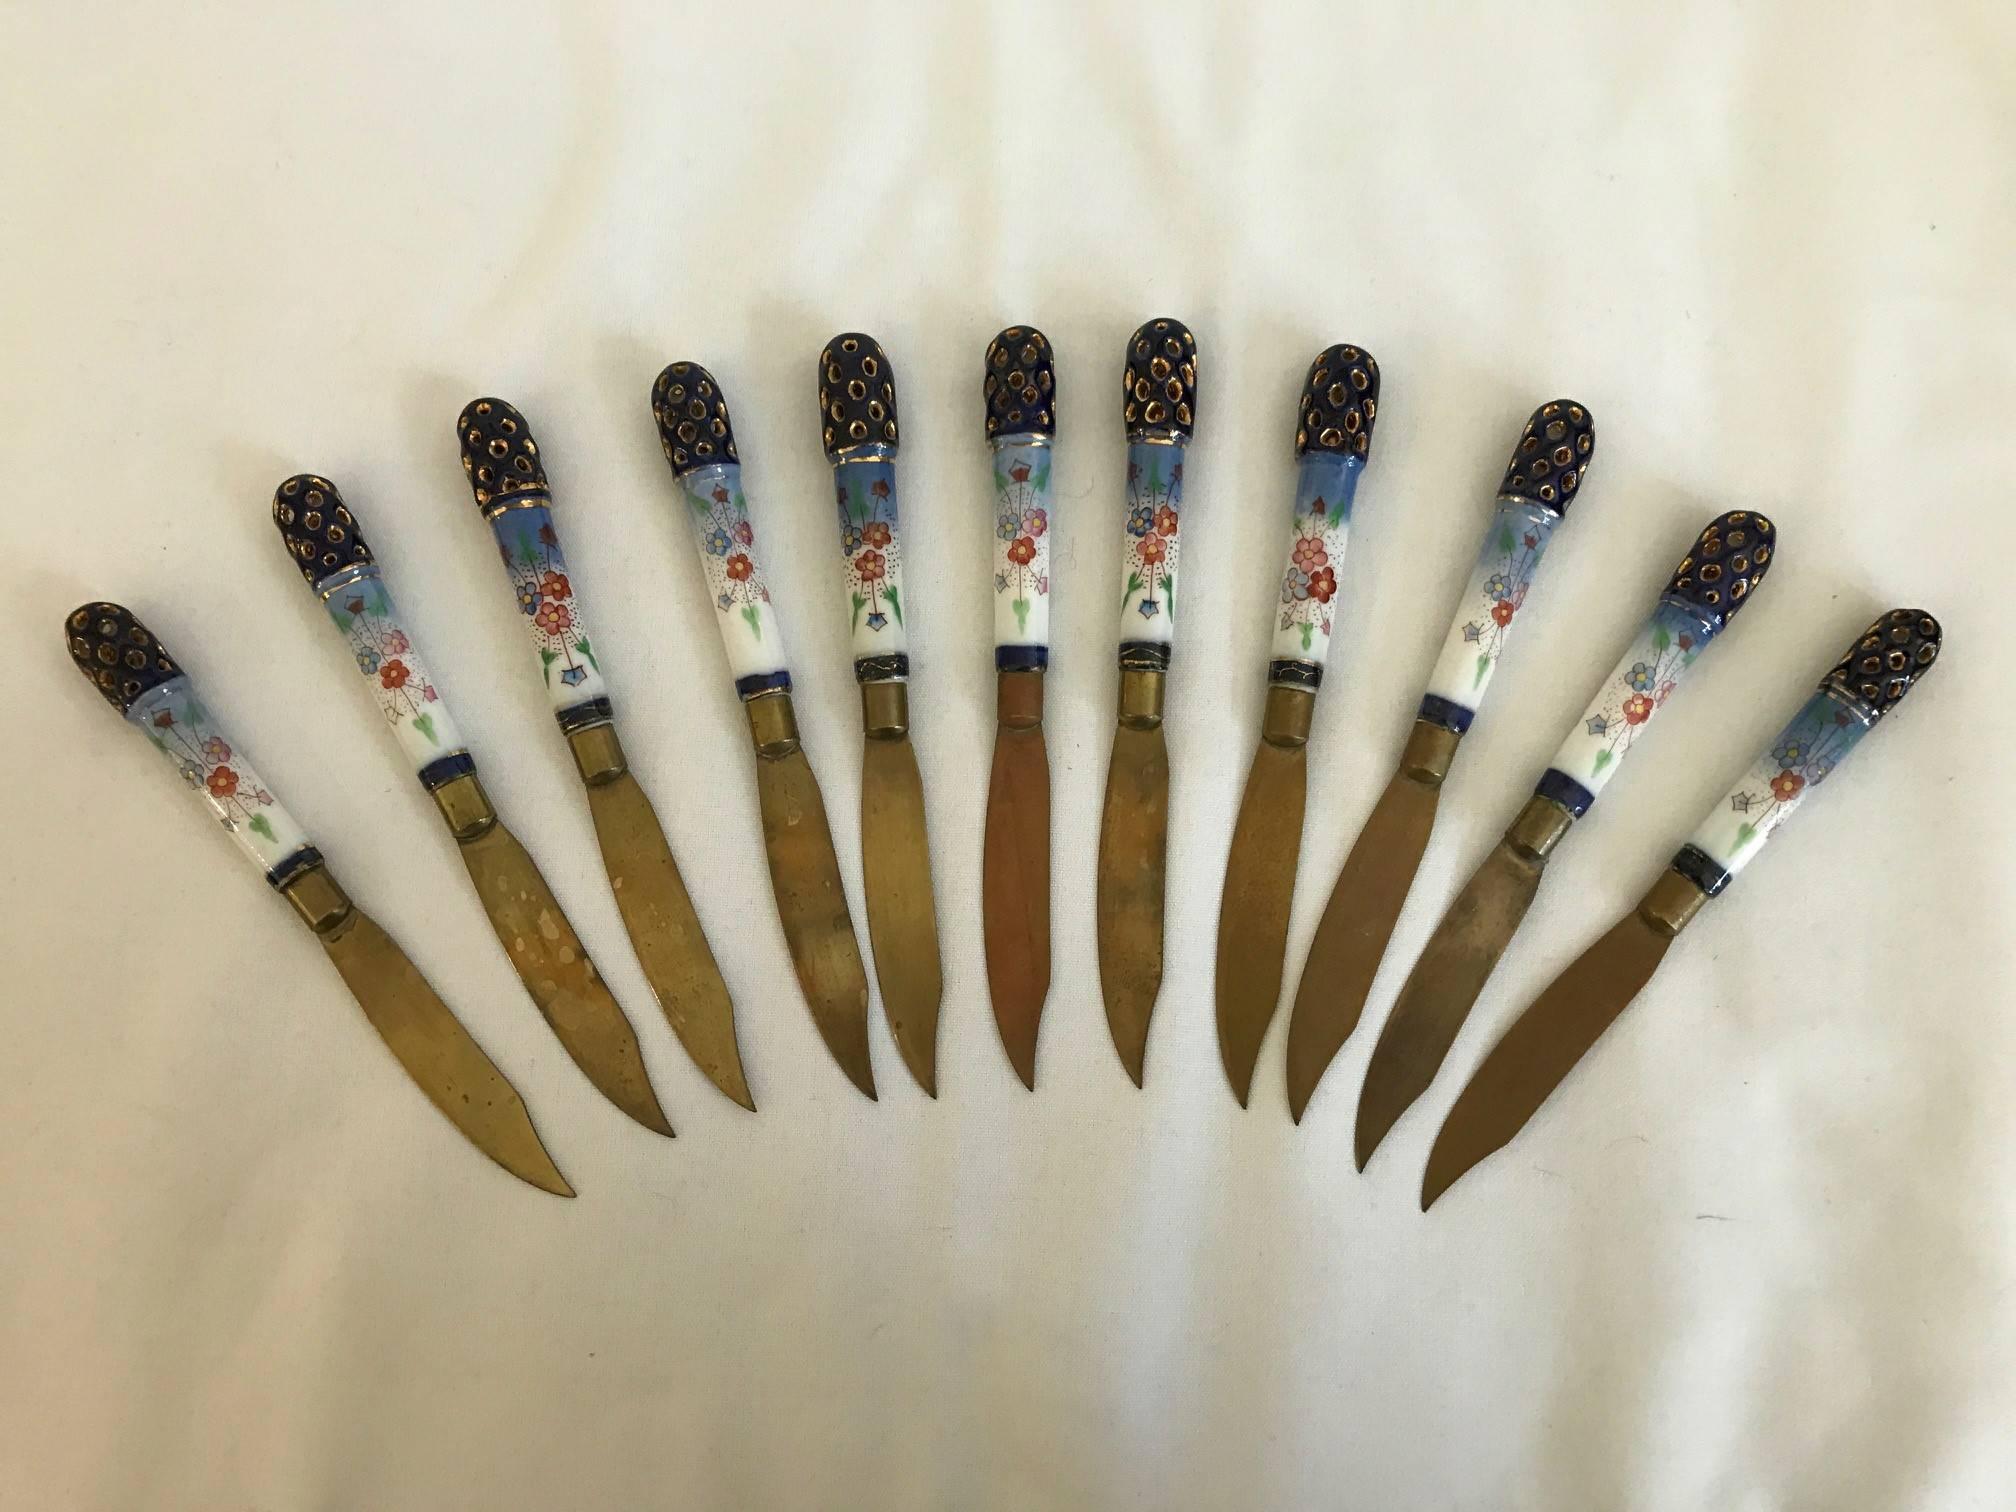 Early 20th Century Set of 12 Made in Austria Cheese or Fruit Knives Brass Knives Porcelain Handles